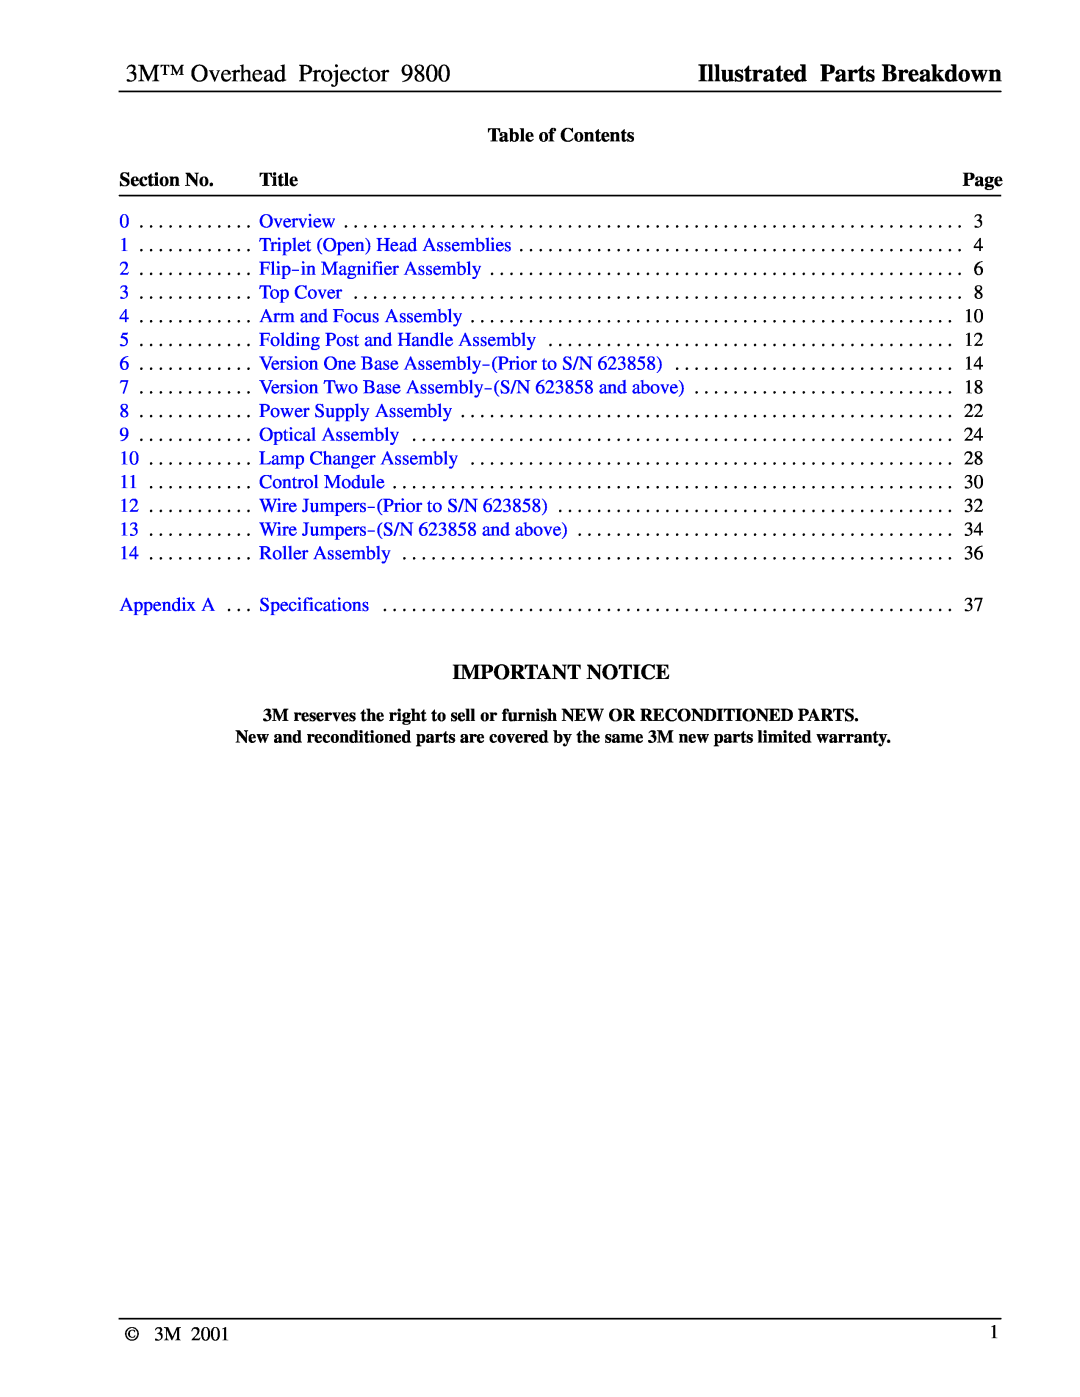 3M 9800 Important Notice, Table of Contents, Section No, Title, 3M Overhead Projector, Illustrated Parts Breakdown, Page 